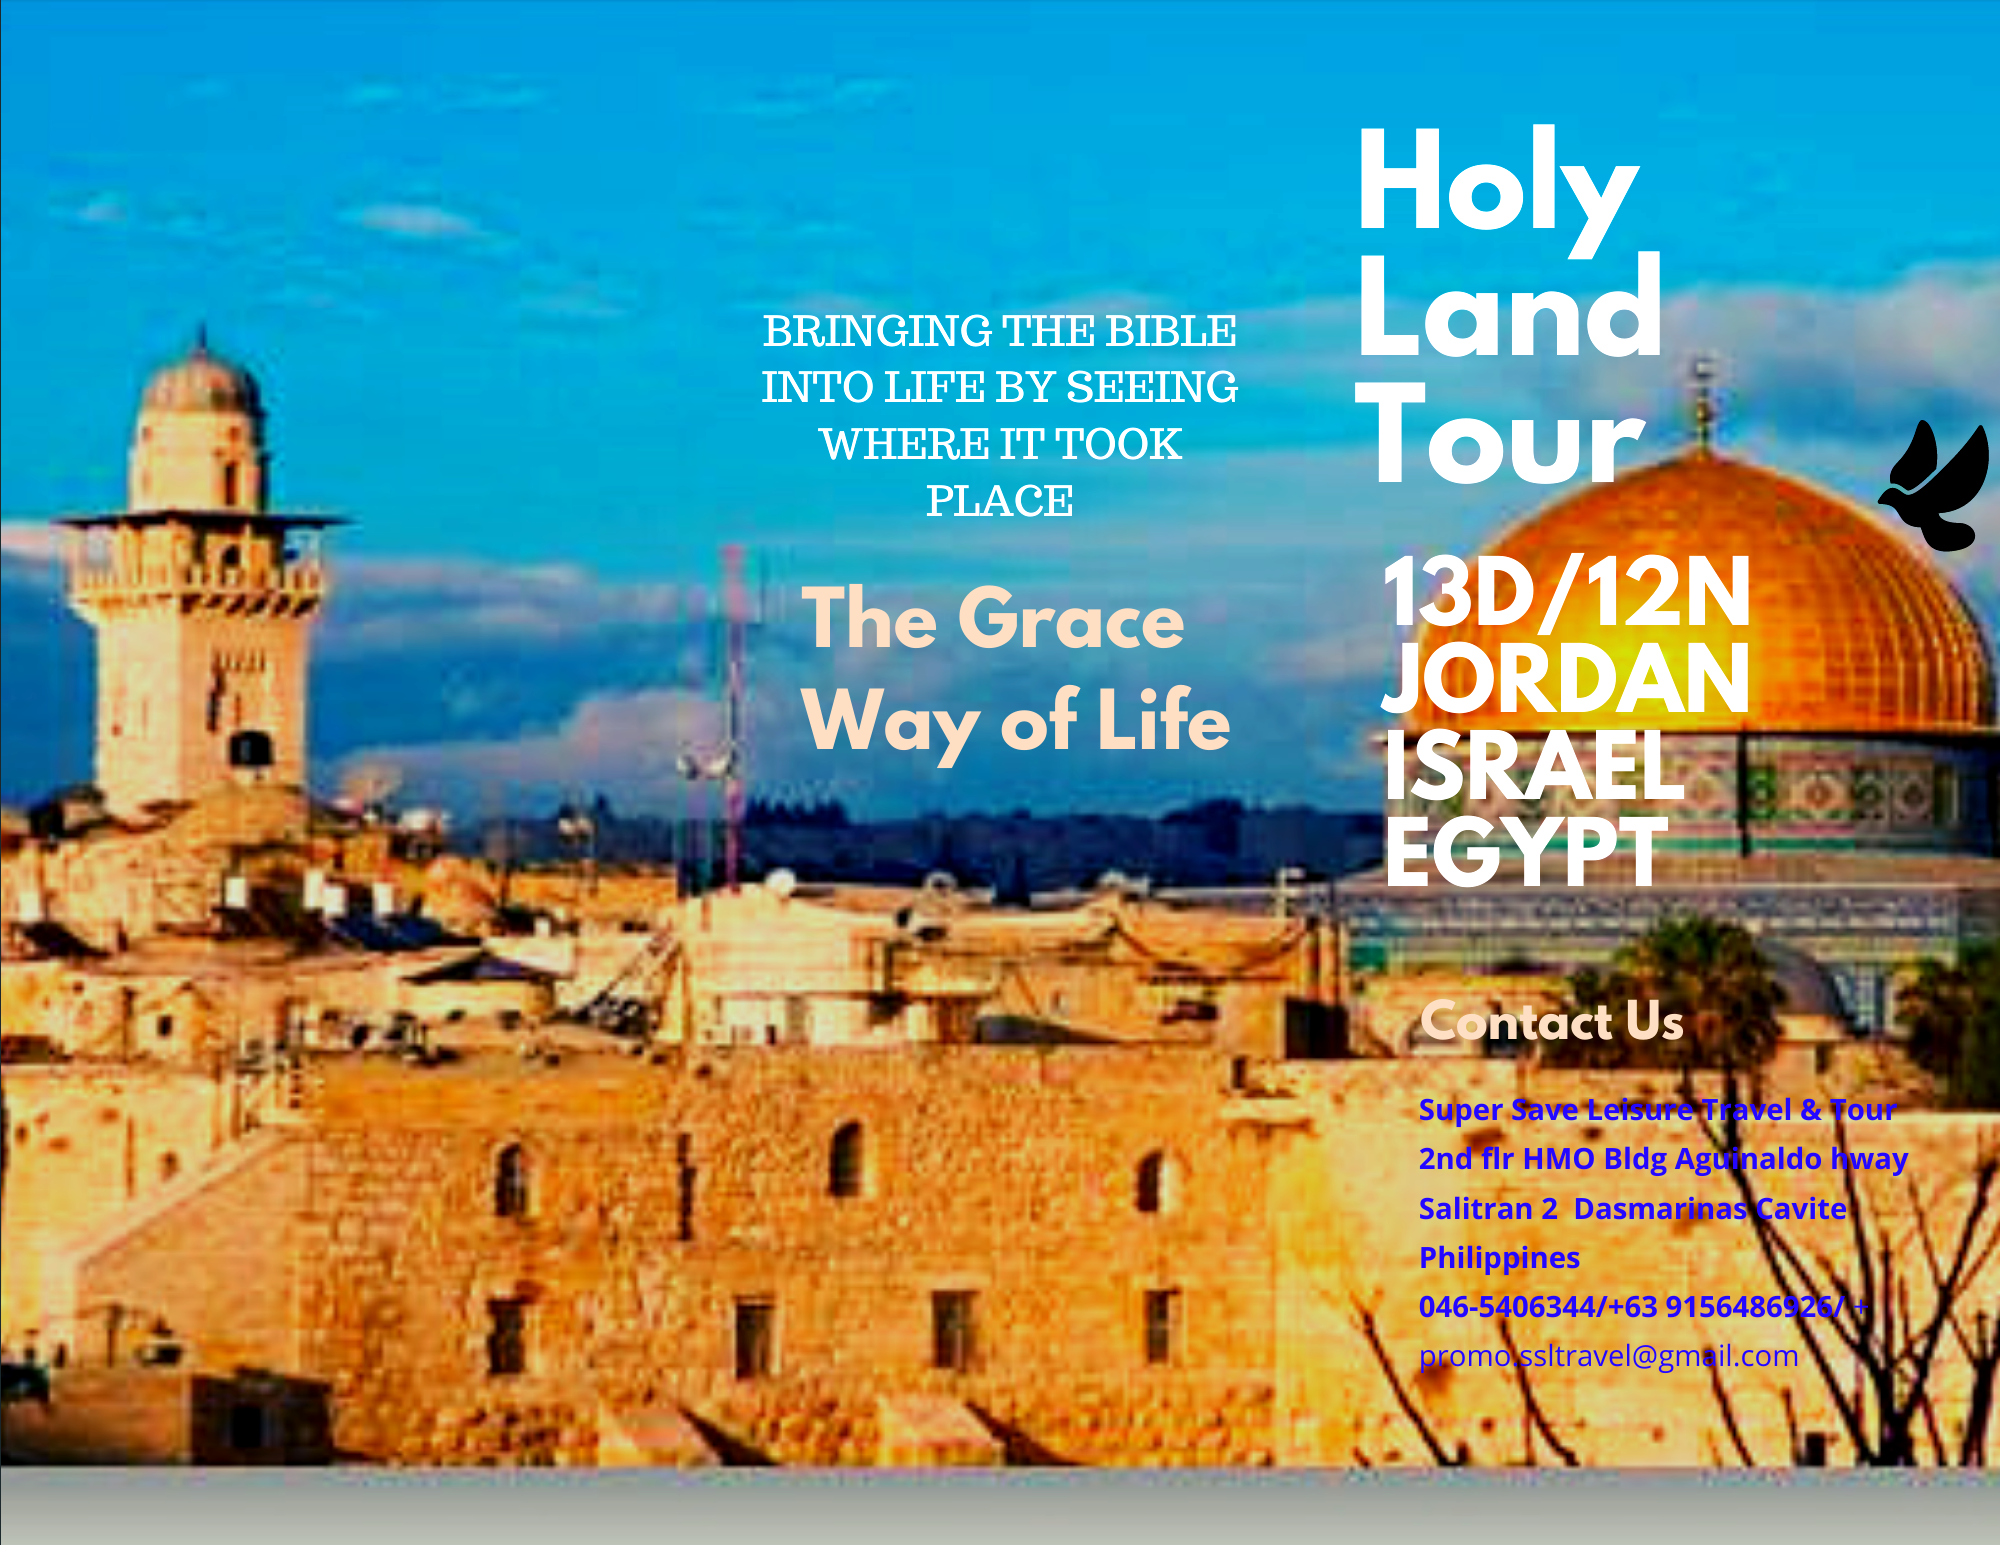 BIBLICAL SITES IN ISRAEL - HOLY LAND TOUR